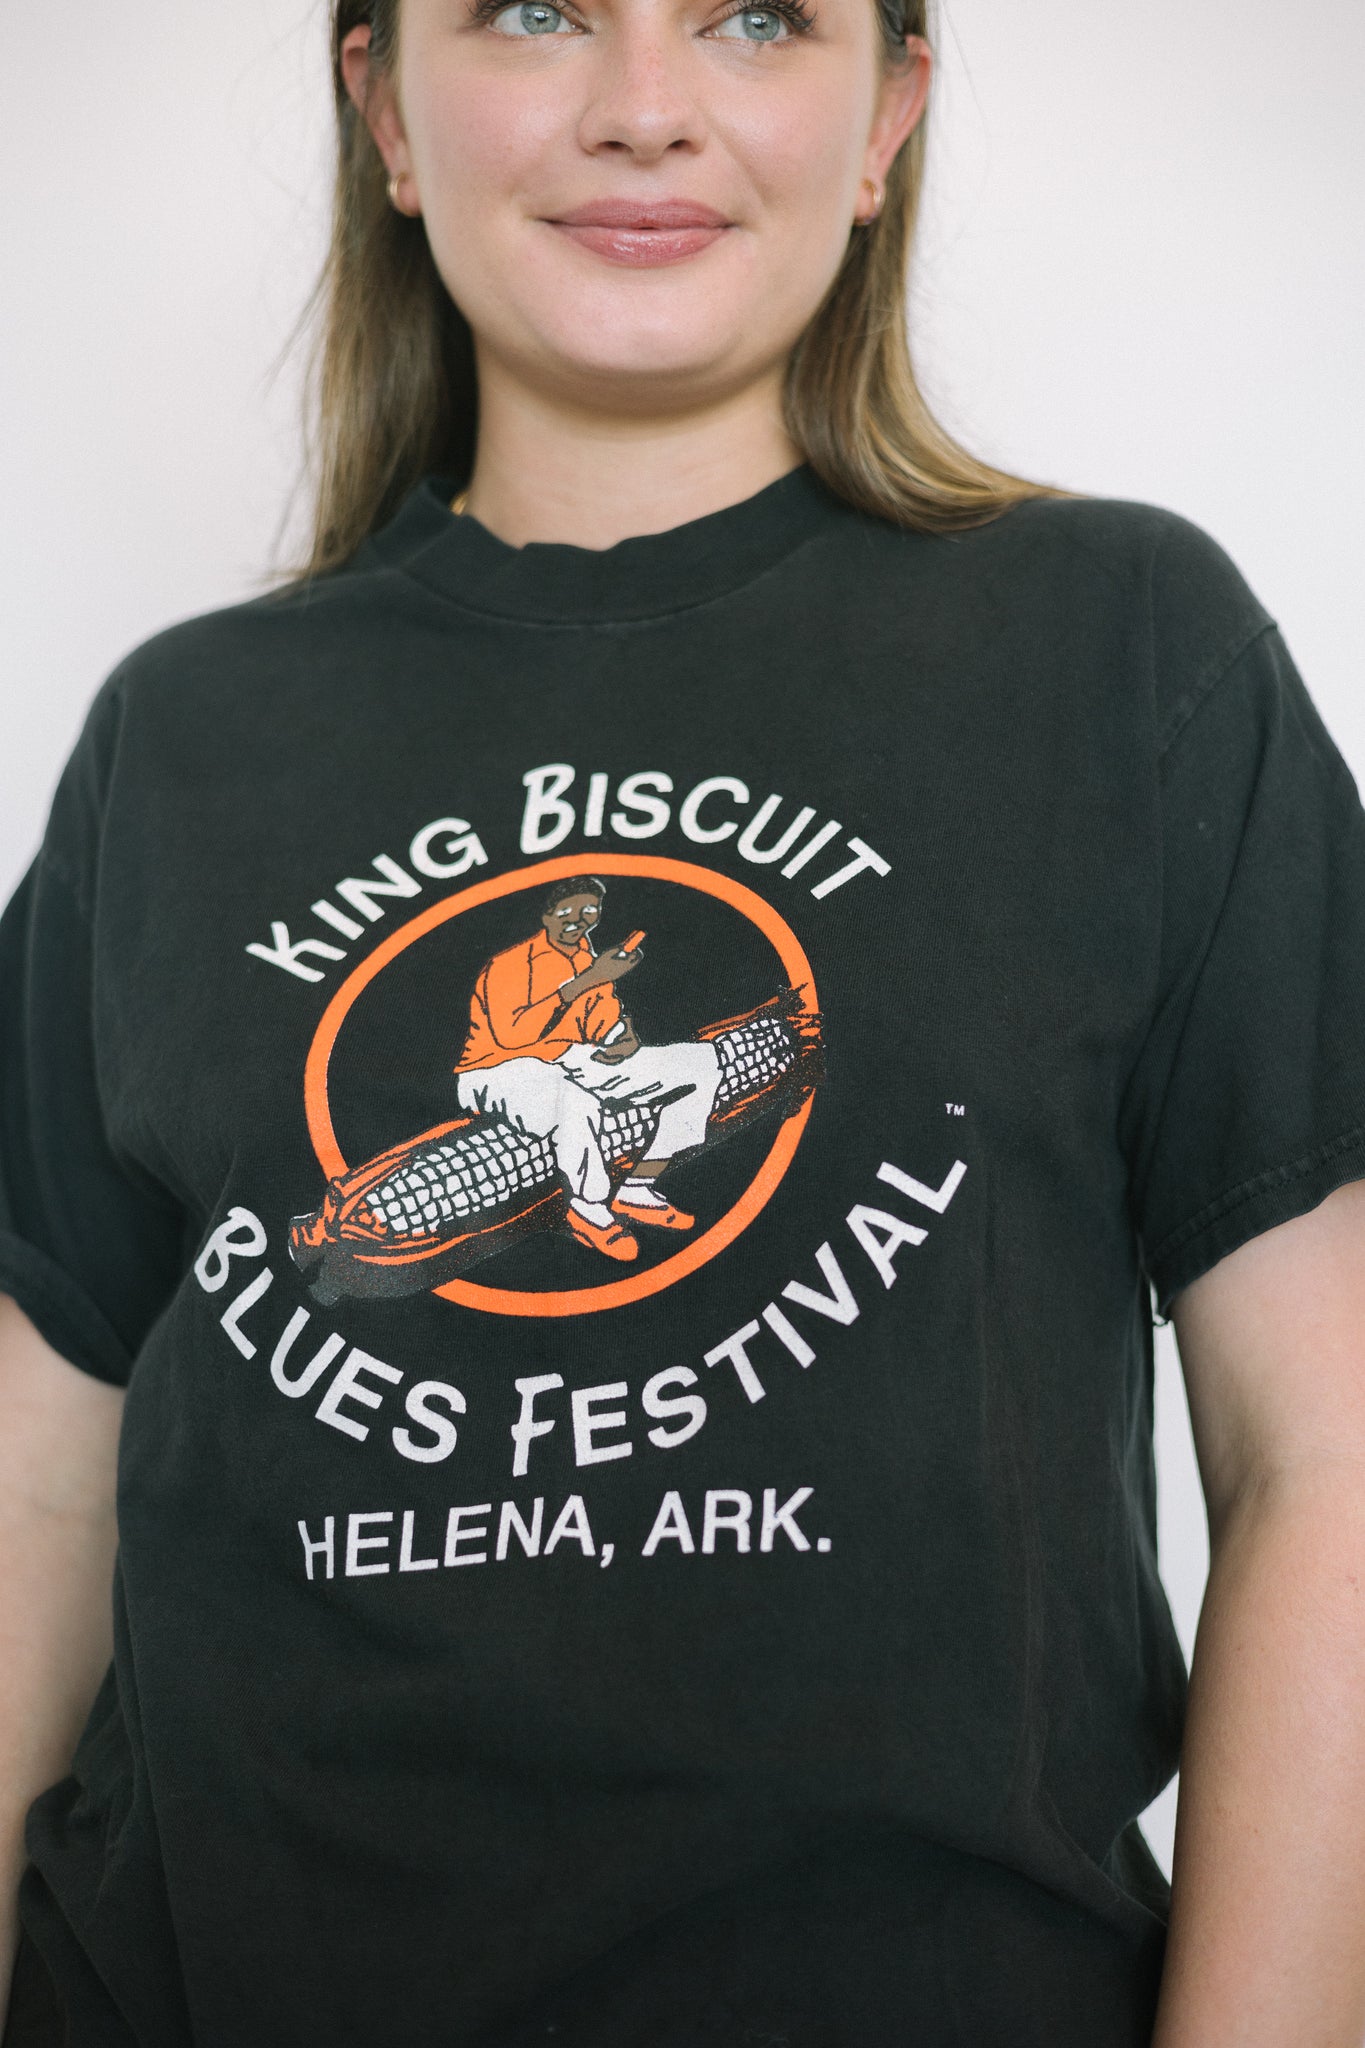 King Biscuit Blues Festival T-Shirt